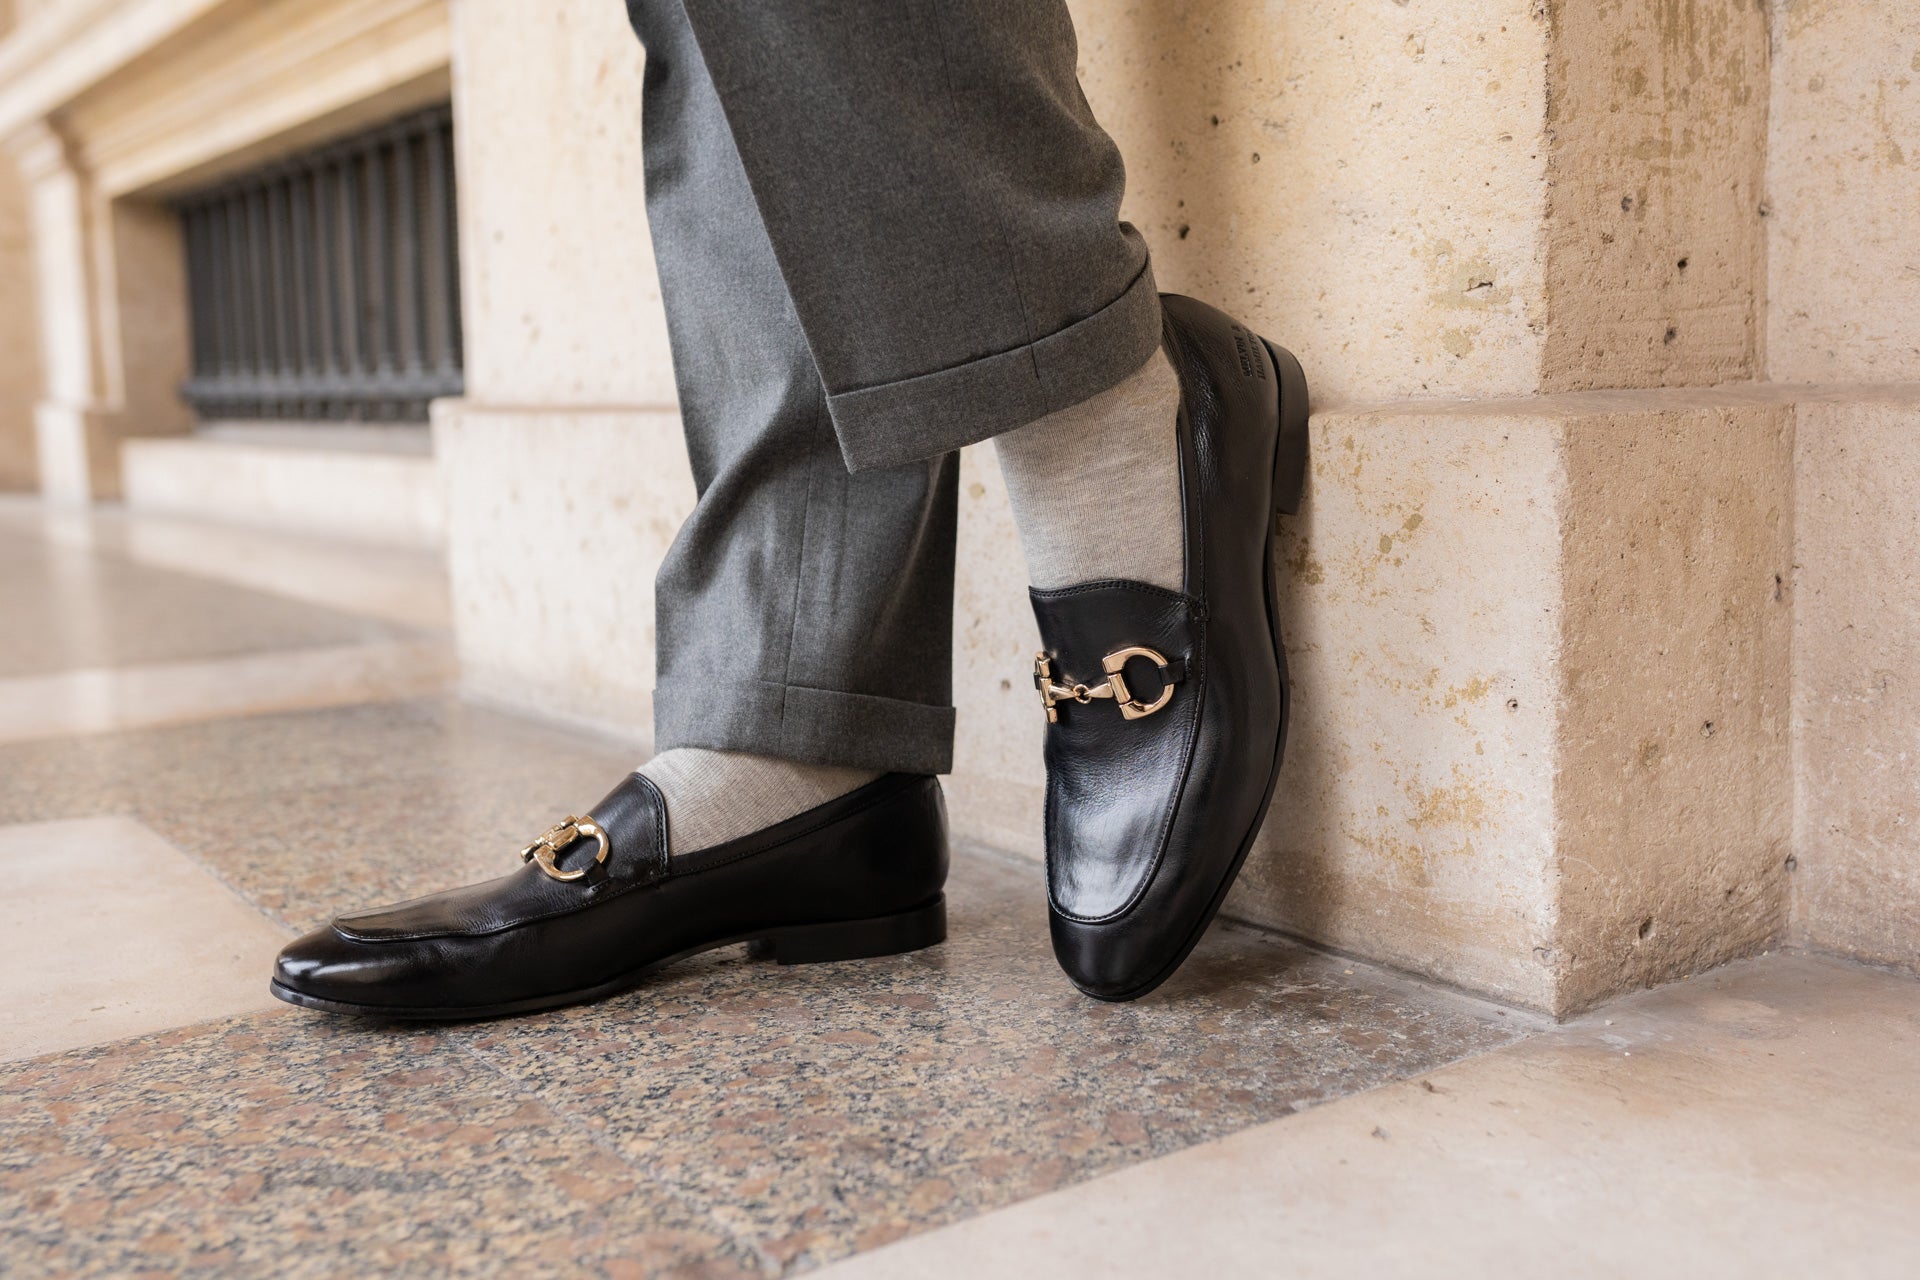 Men's loafers and socks: how wear this duo with style? Melvin & Hamilton